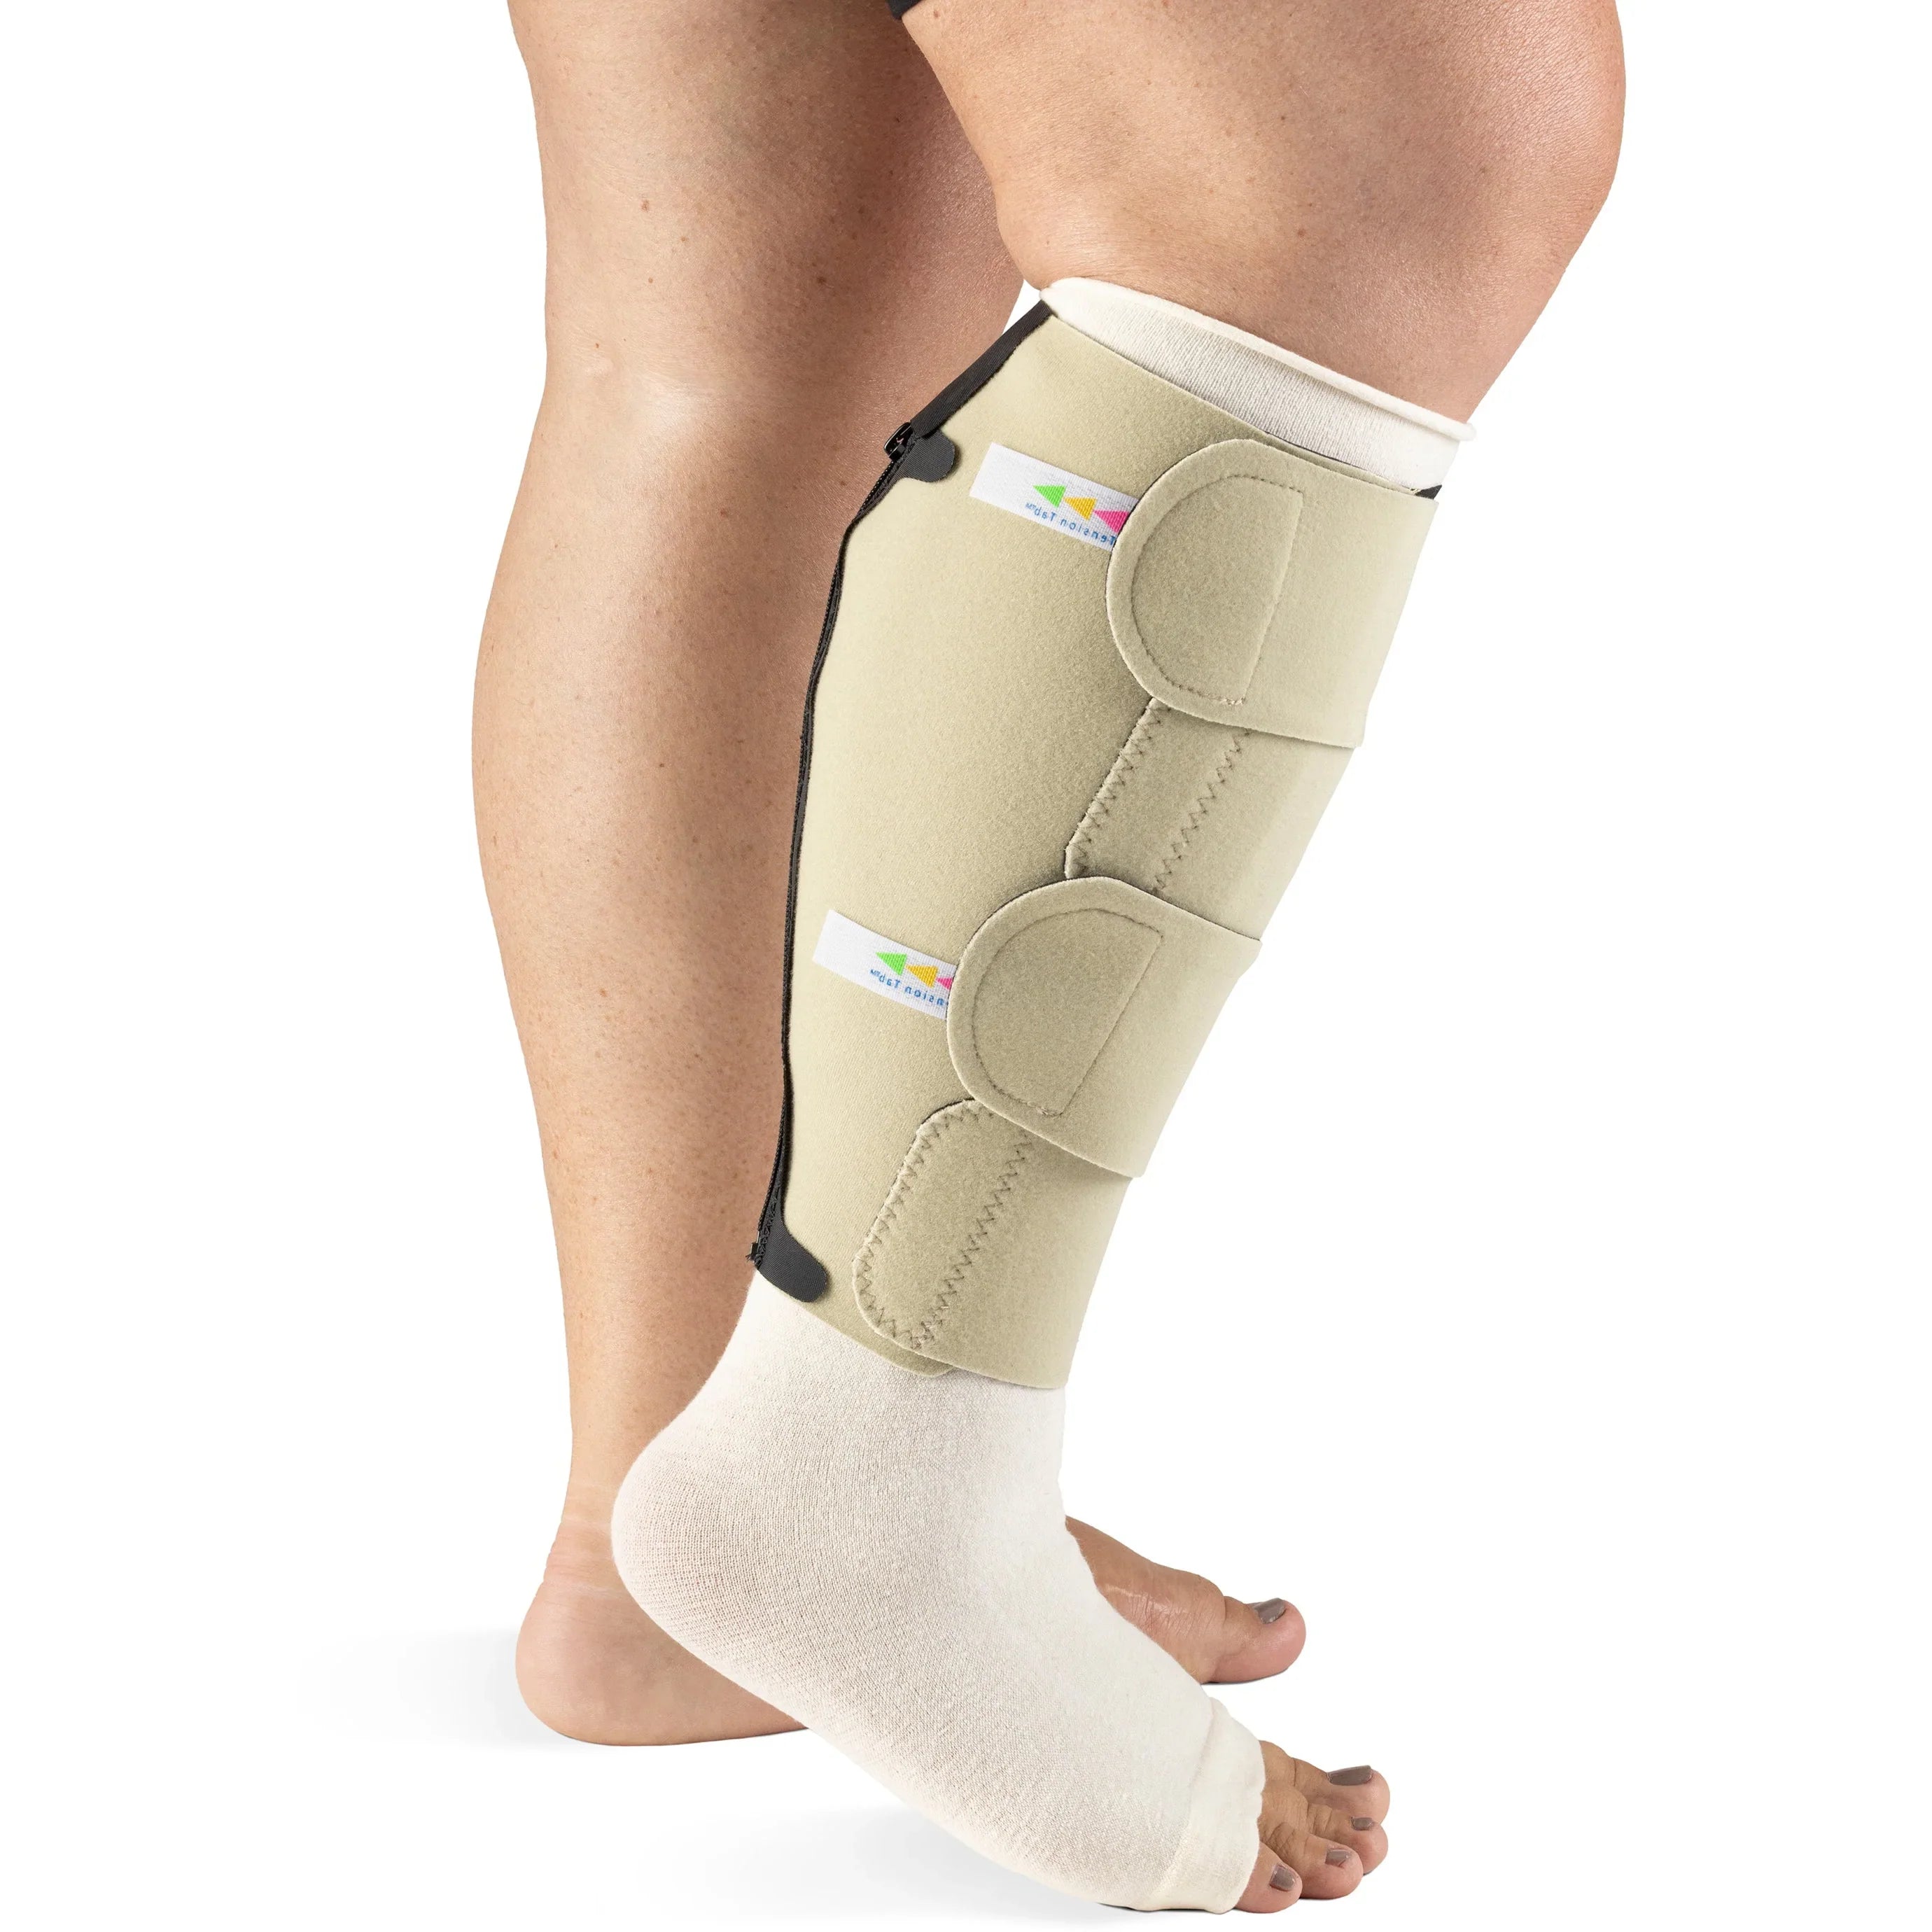 Sigvaris Chipsleeve Full Leg – Compression Store